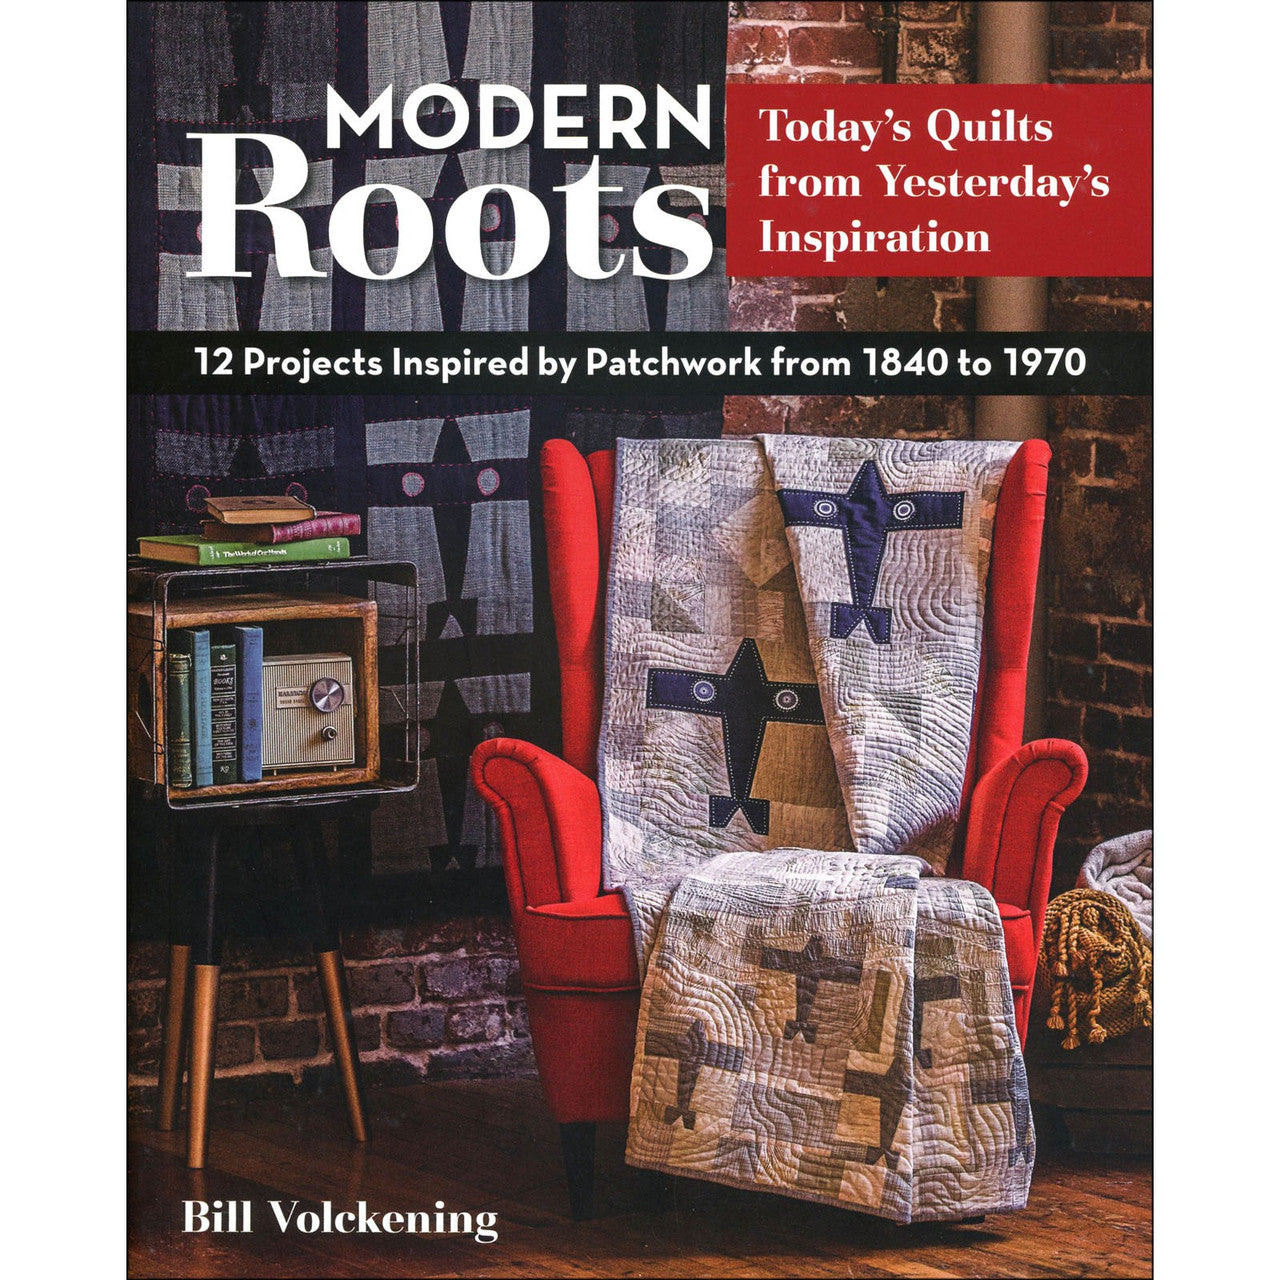 Modern Roots - Today's Quilts from Yesterday's Inspiration book - 452031